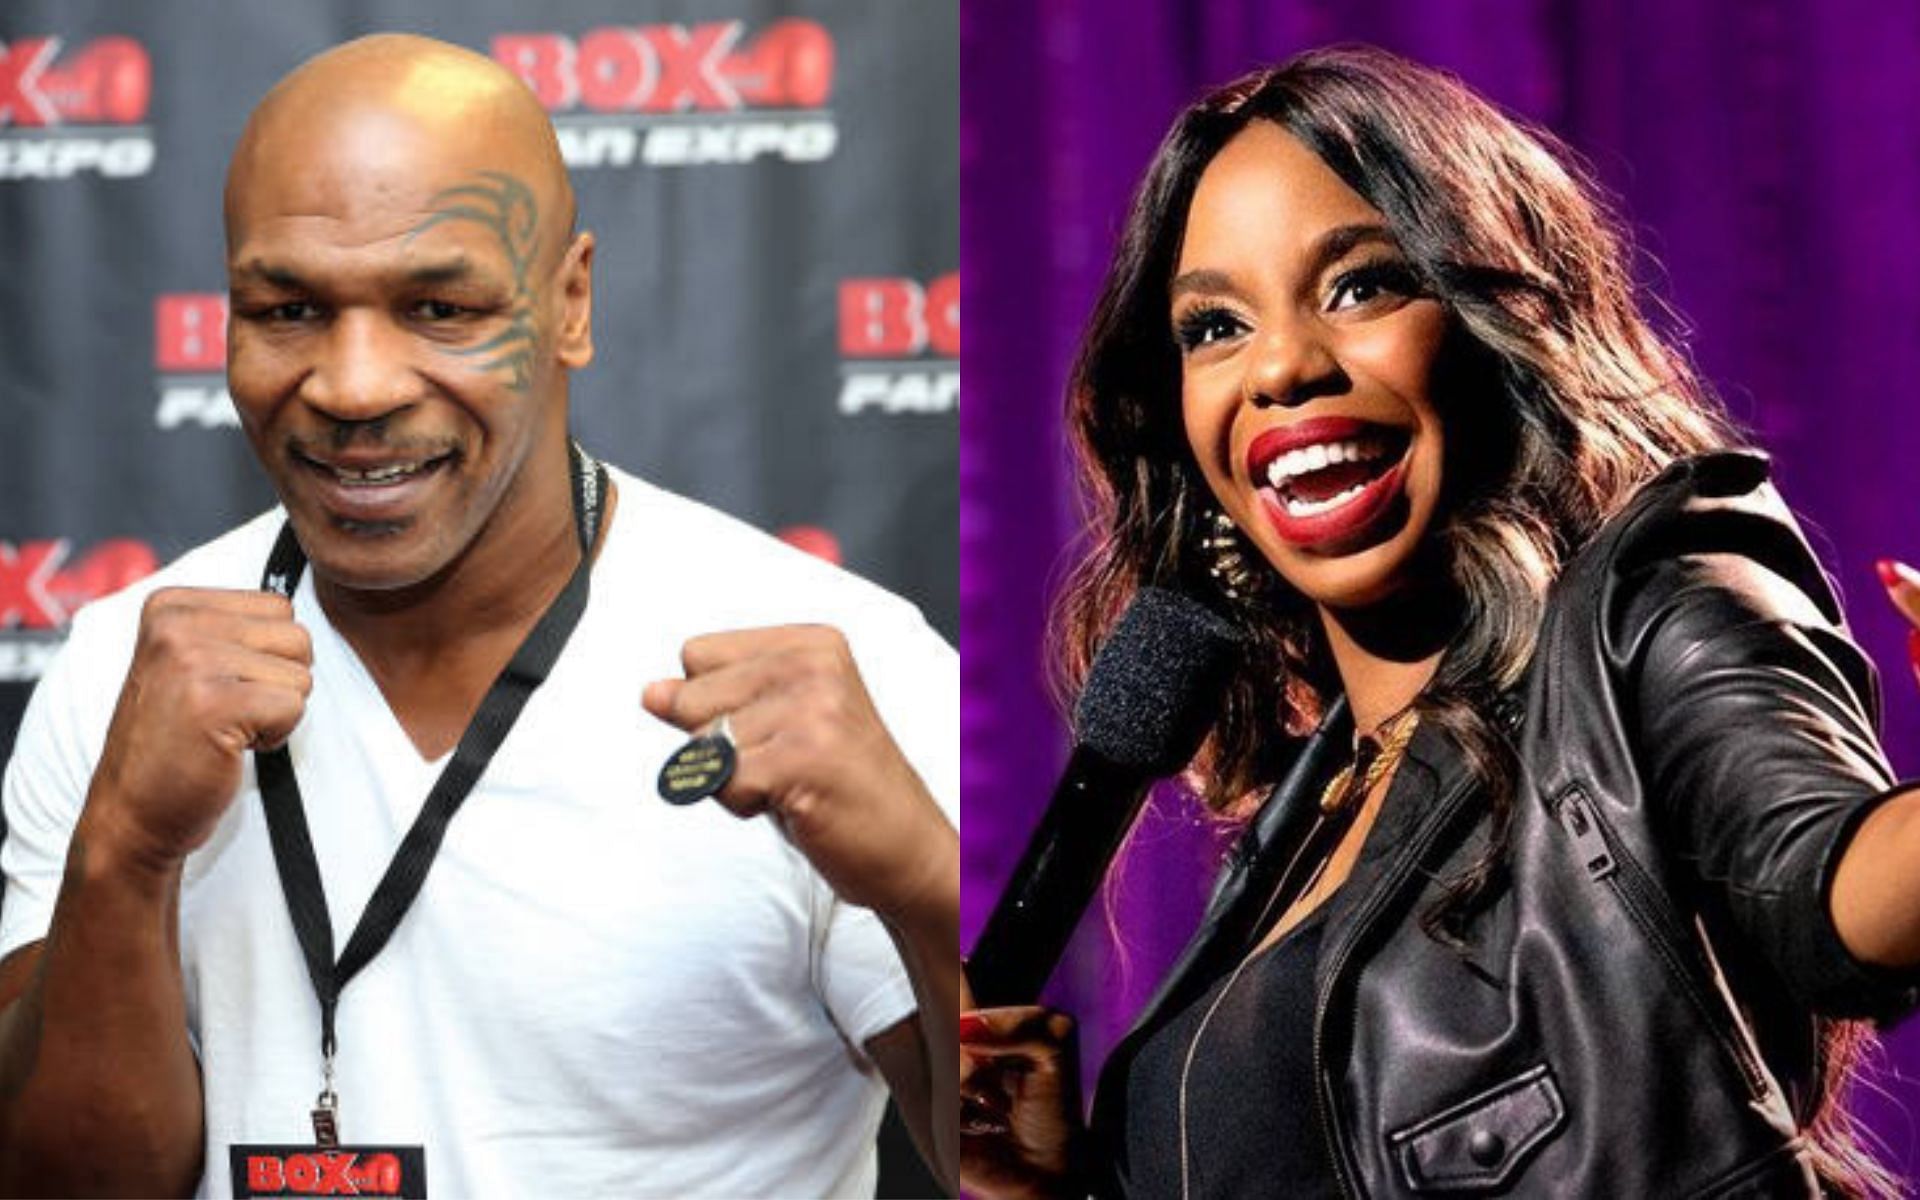 Mike Tyson (left) and London Hughes (right) (Image credits Getty Images and @thelondonhughes on Twitter)